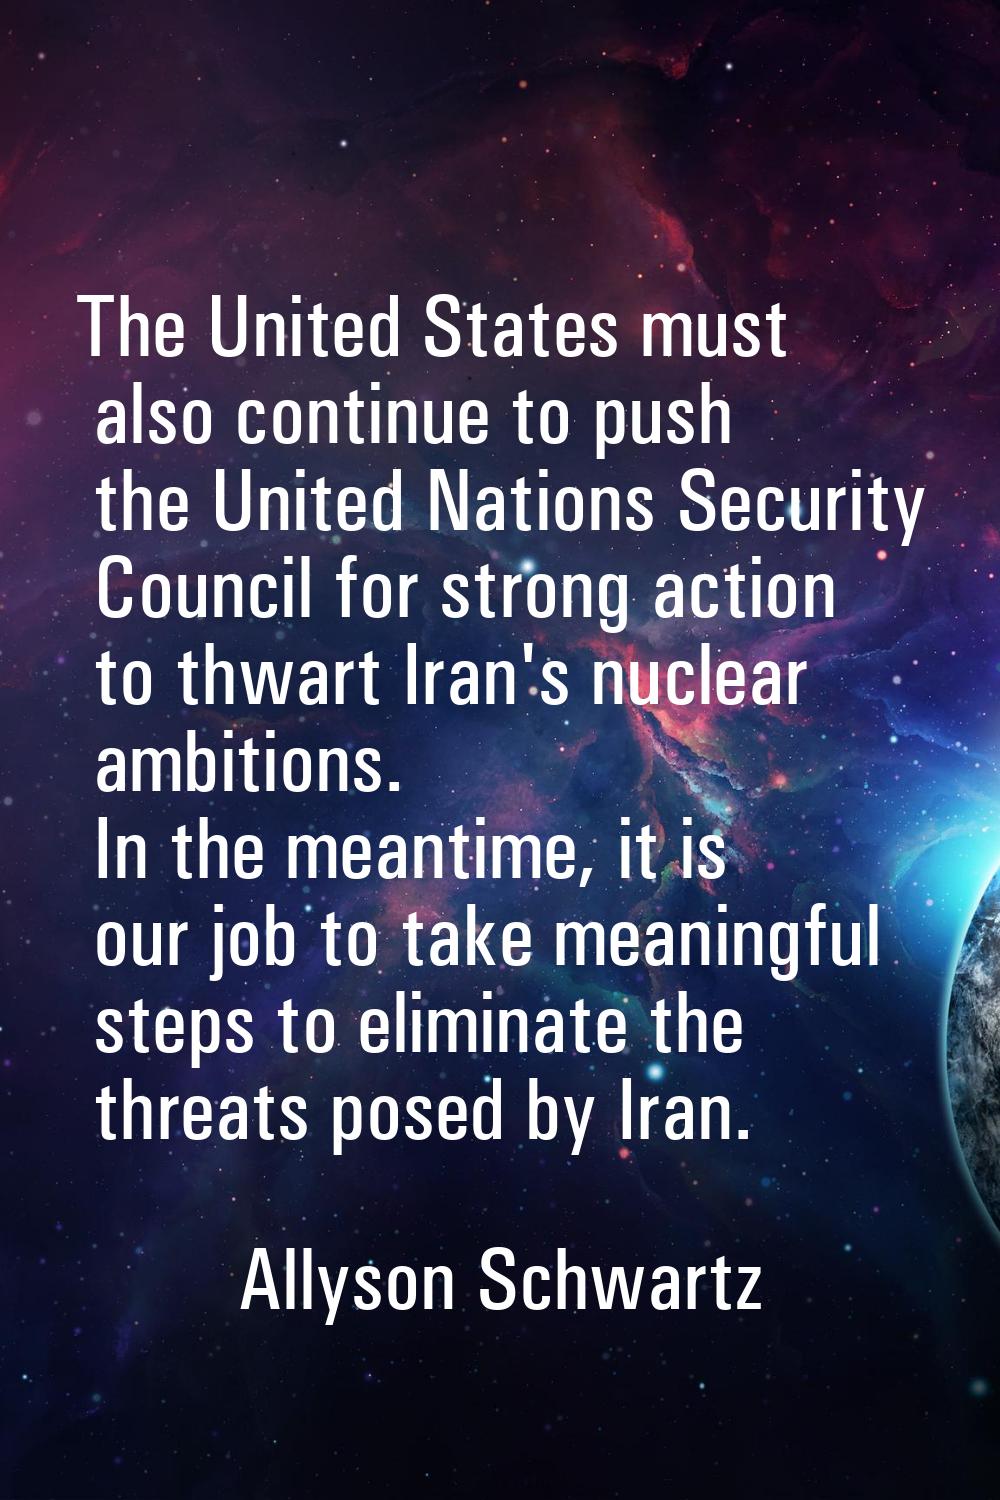 The United States must also continue to push the United Nations Security Council for strong action 